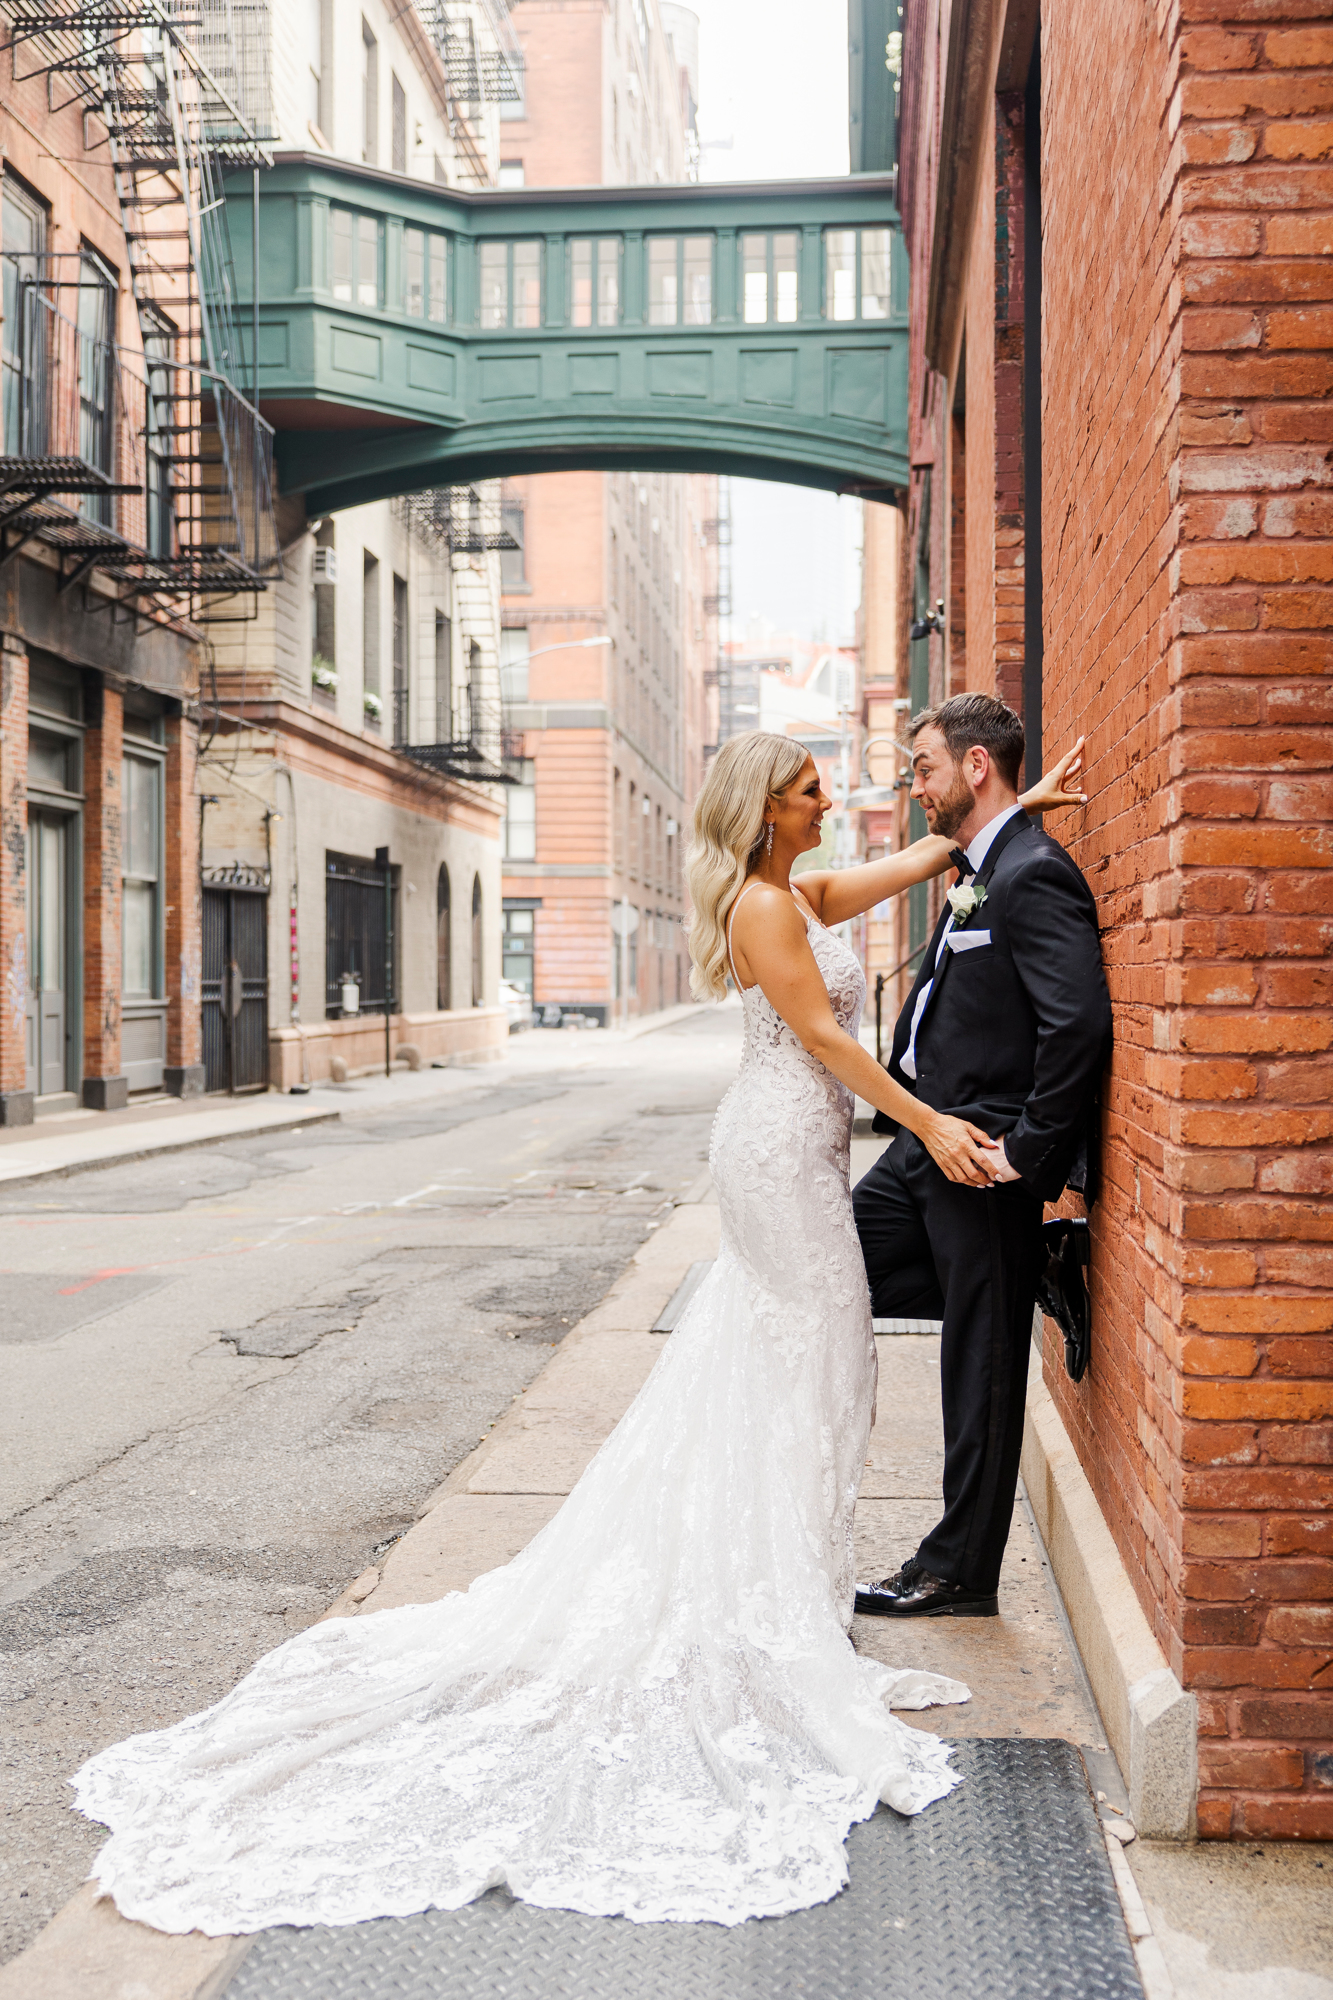 Awesome Photo Gallery of Tribeca Rooftop Wedding